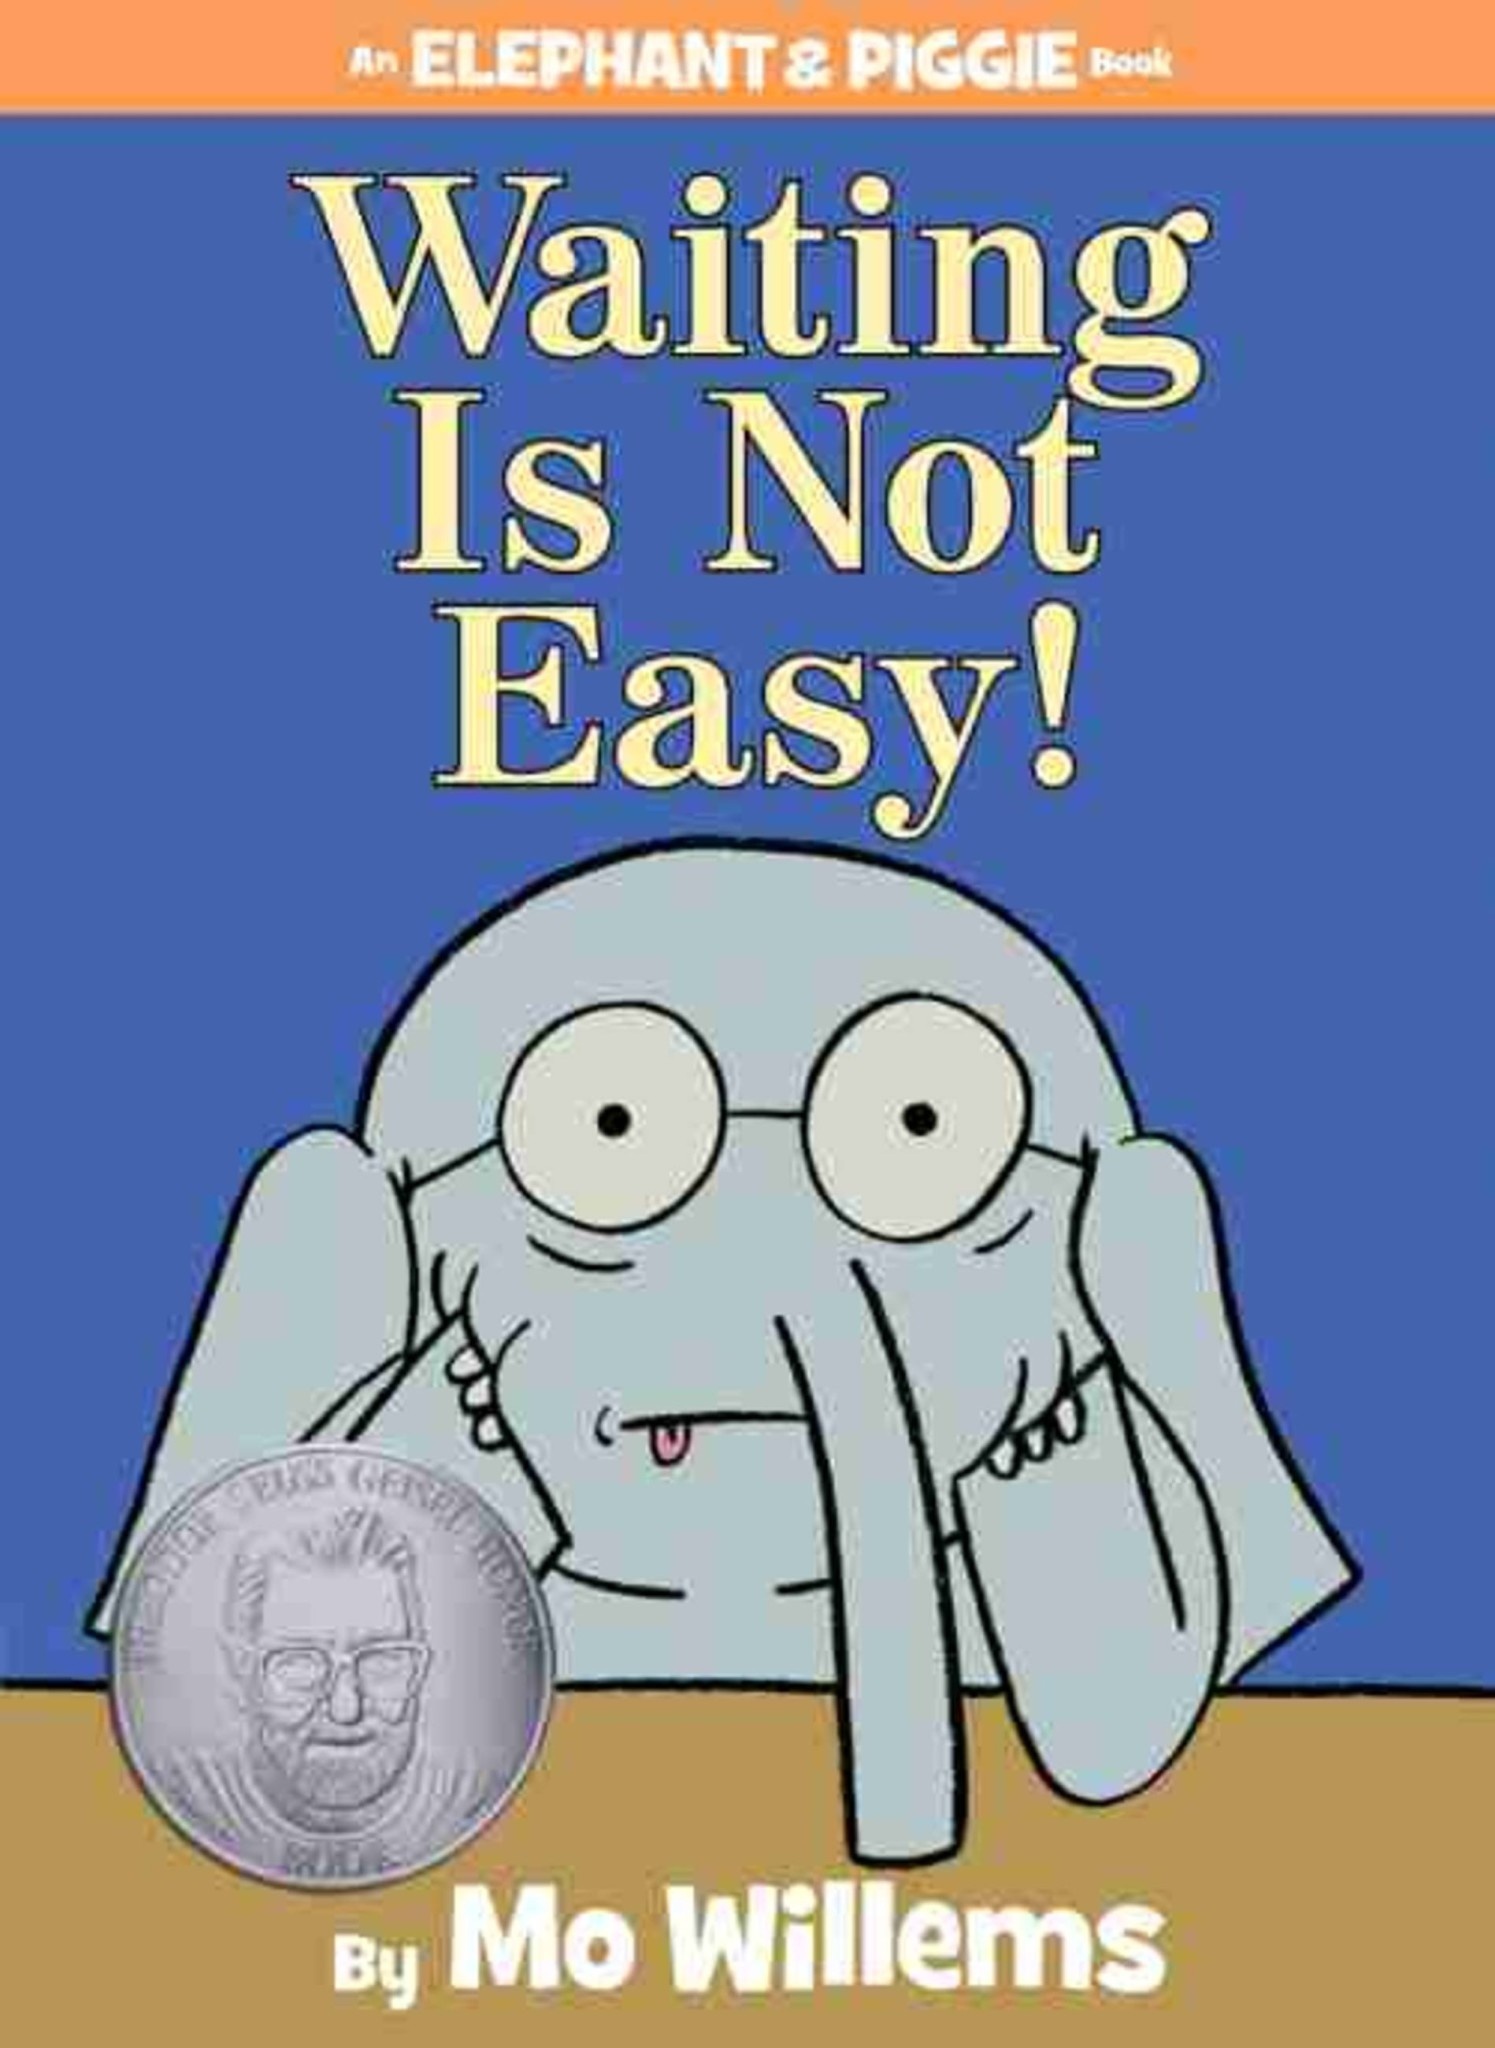 Waiting Is Not Easy! by Mo Willems